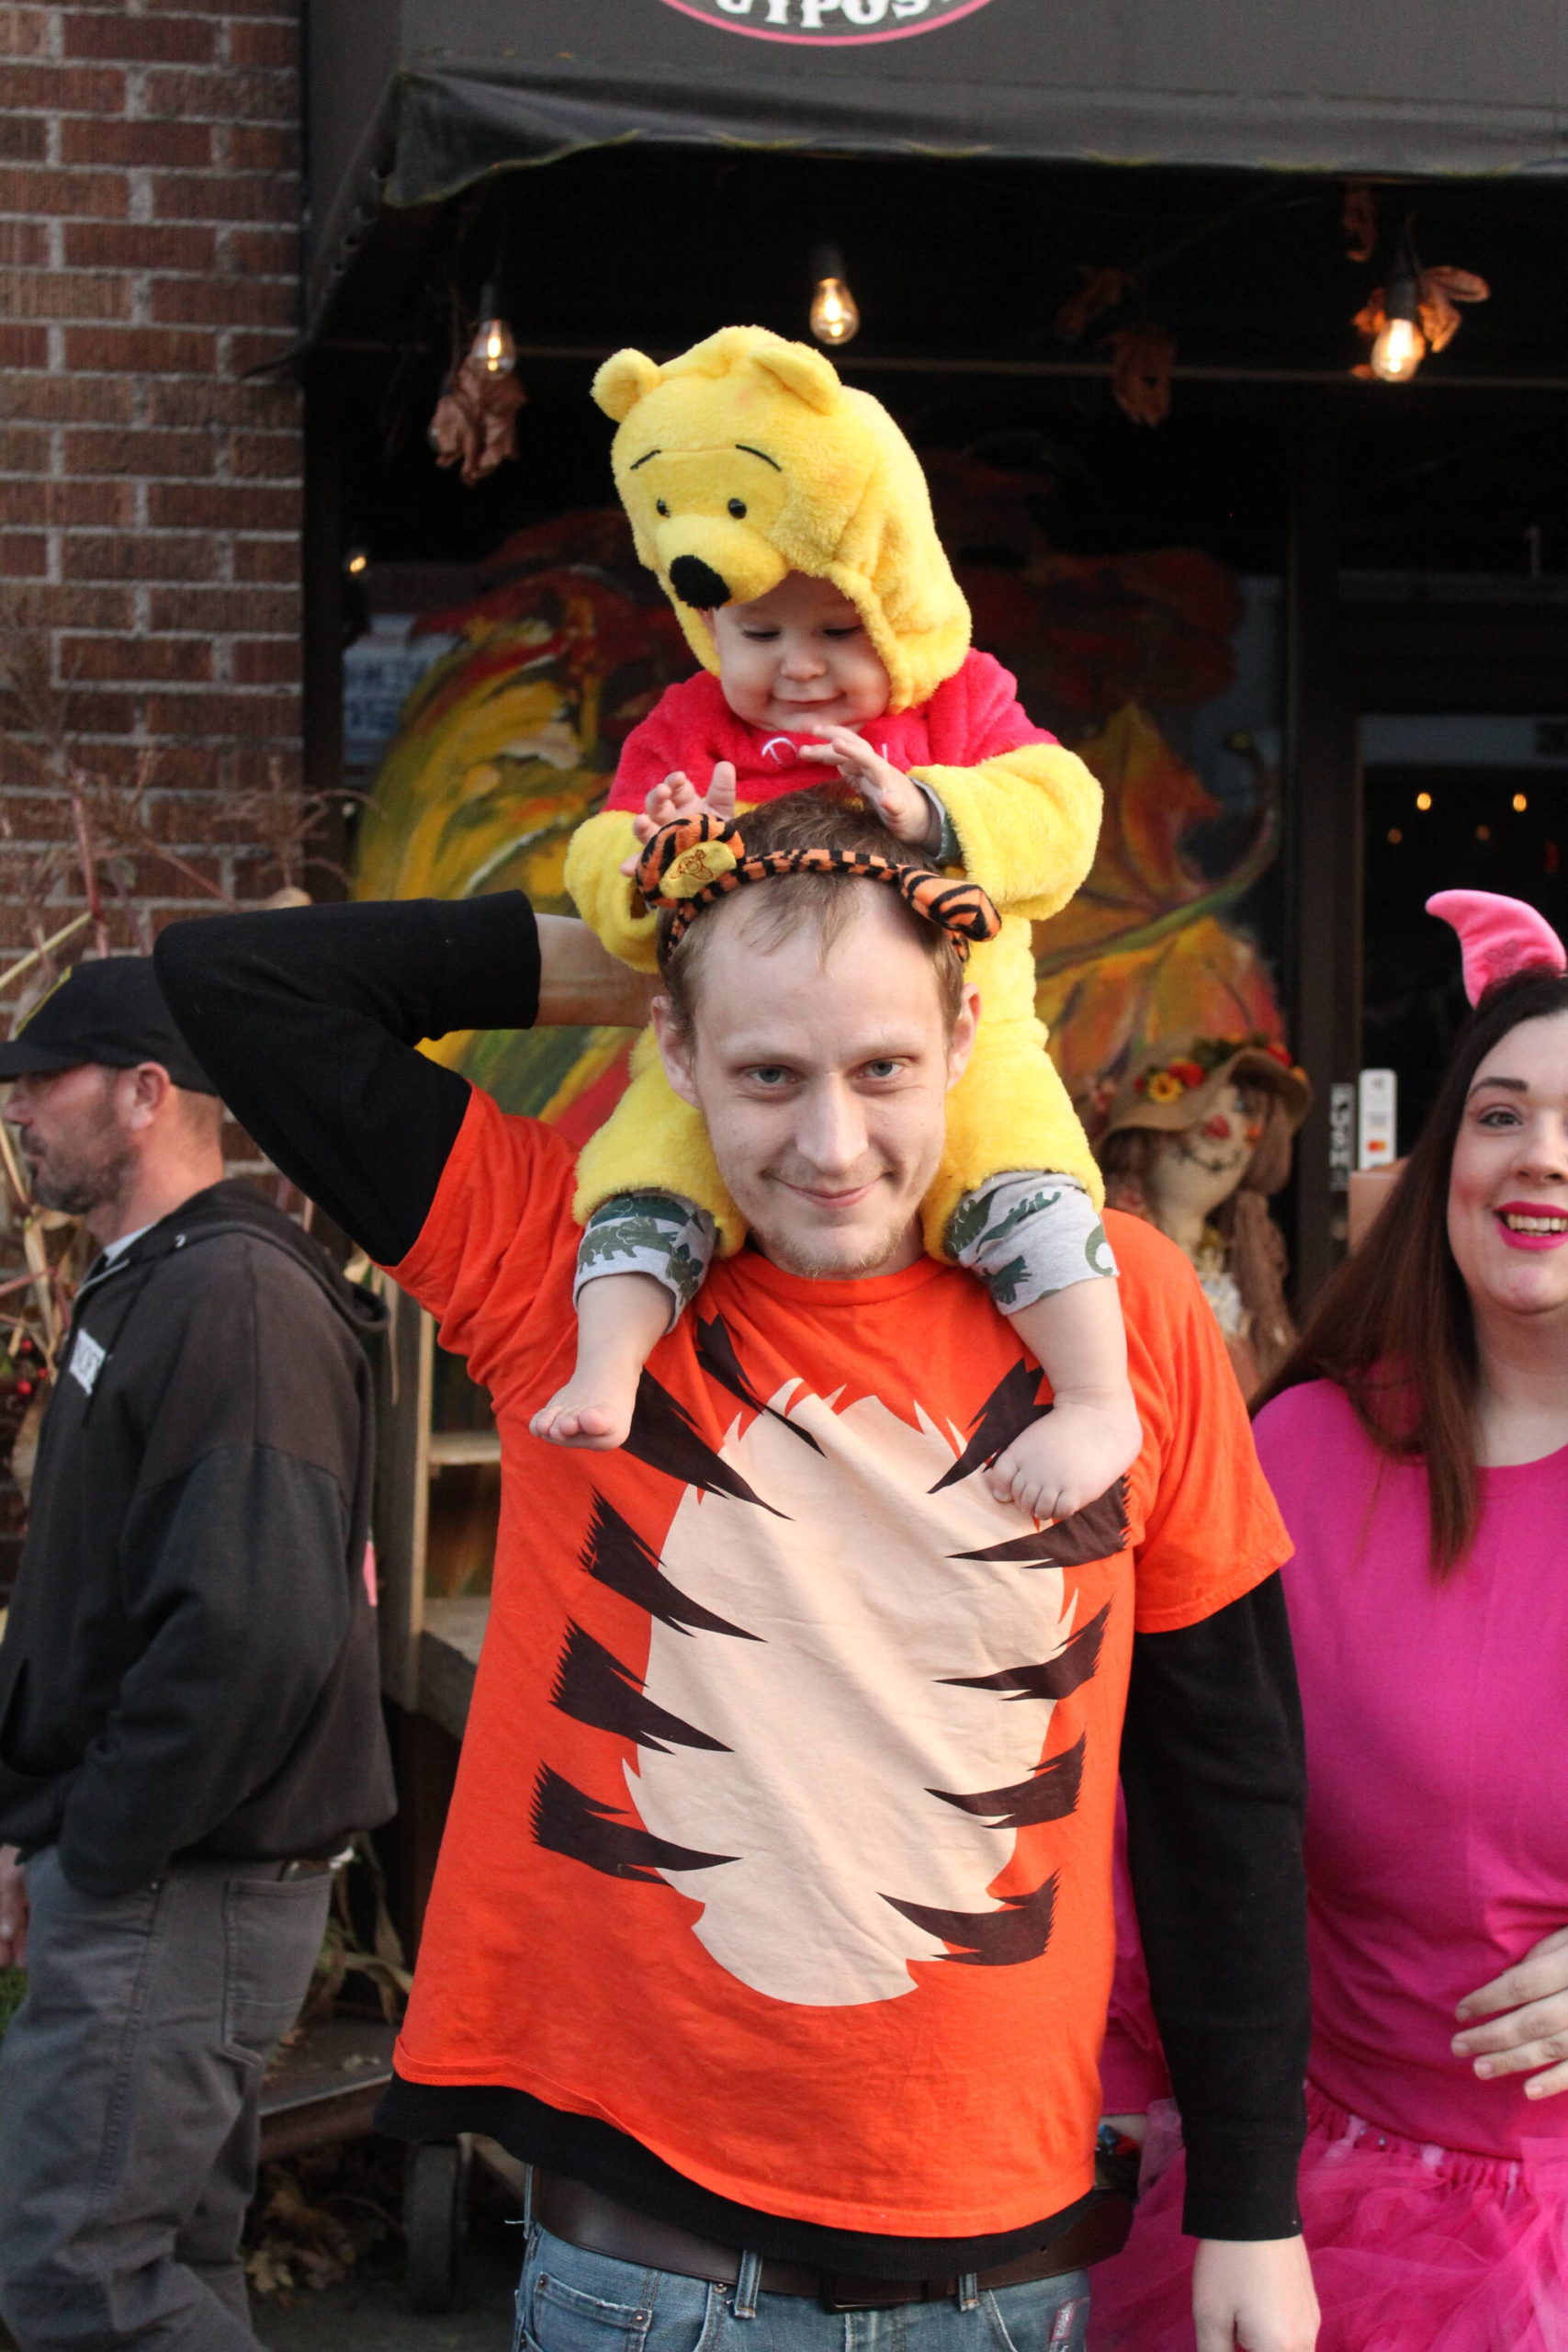 Halloween season is upon us, and Enumclaw plans to close down Cole Street again this year to give families the opportunity to safely trick-or-treat downtown.